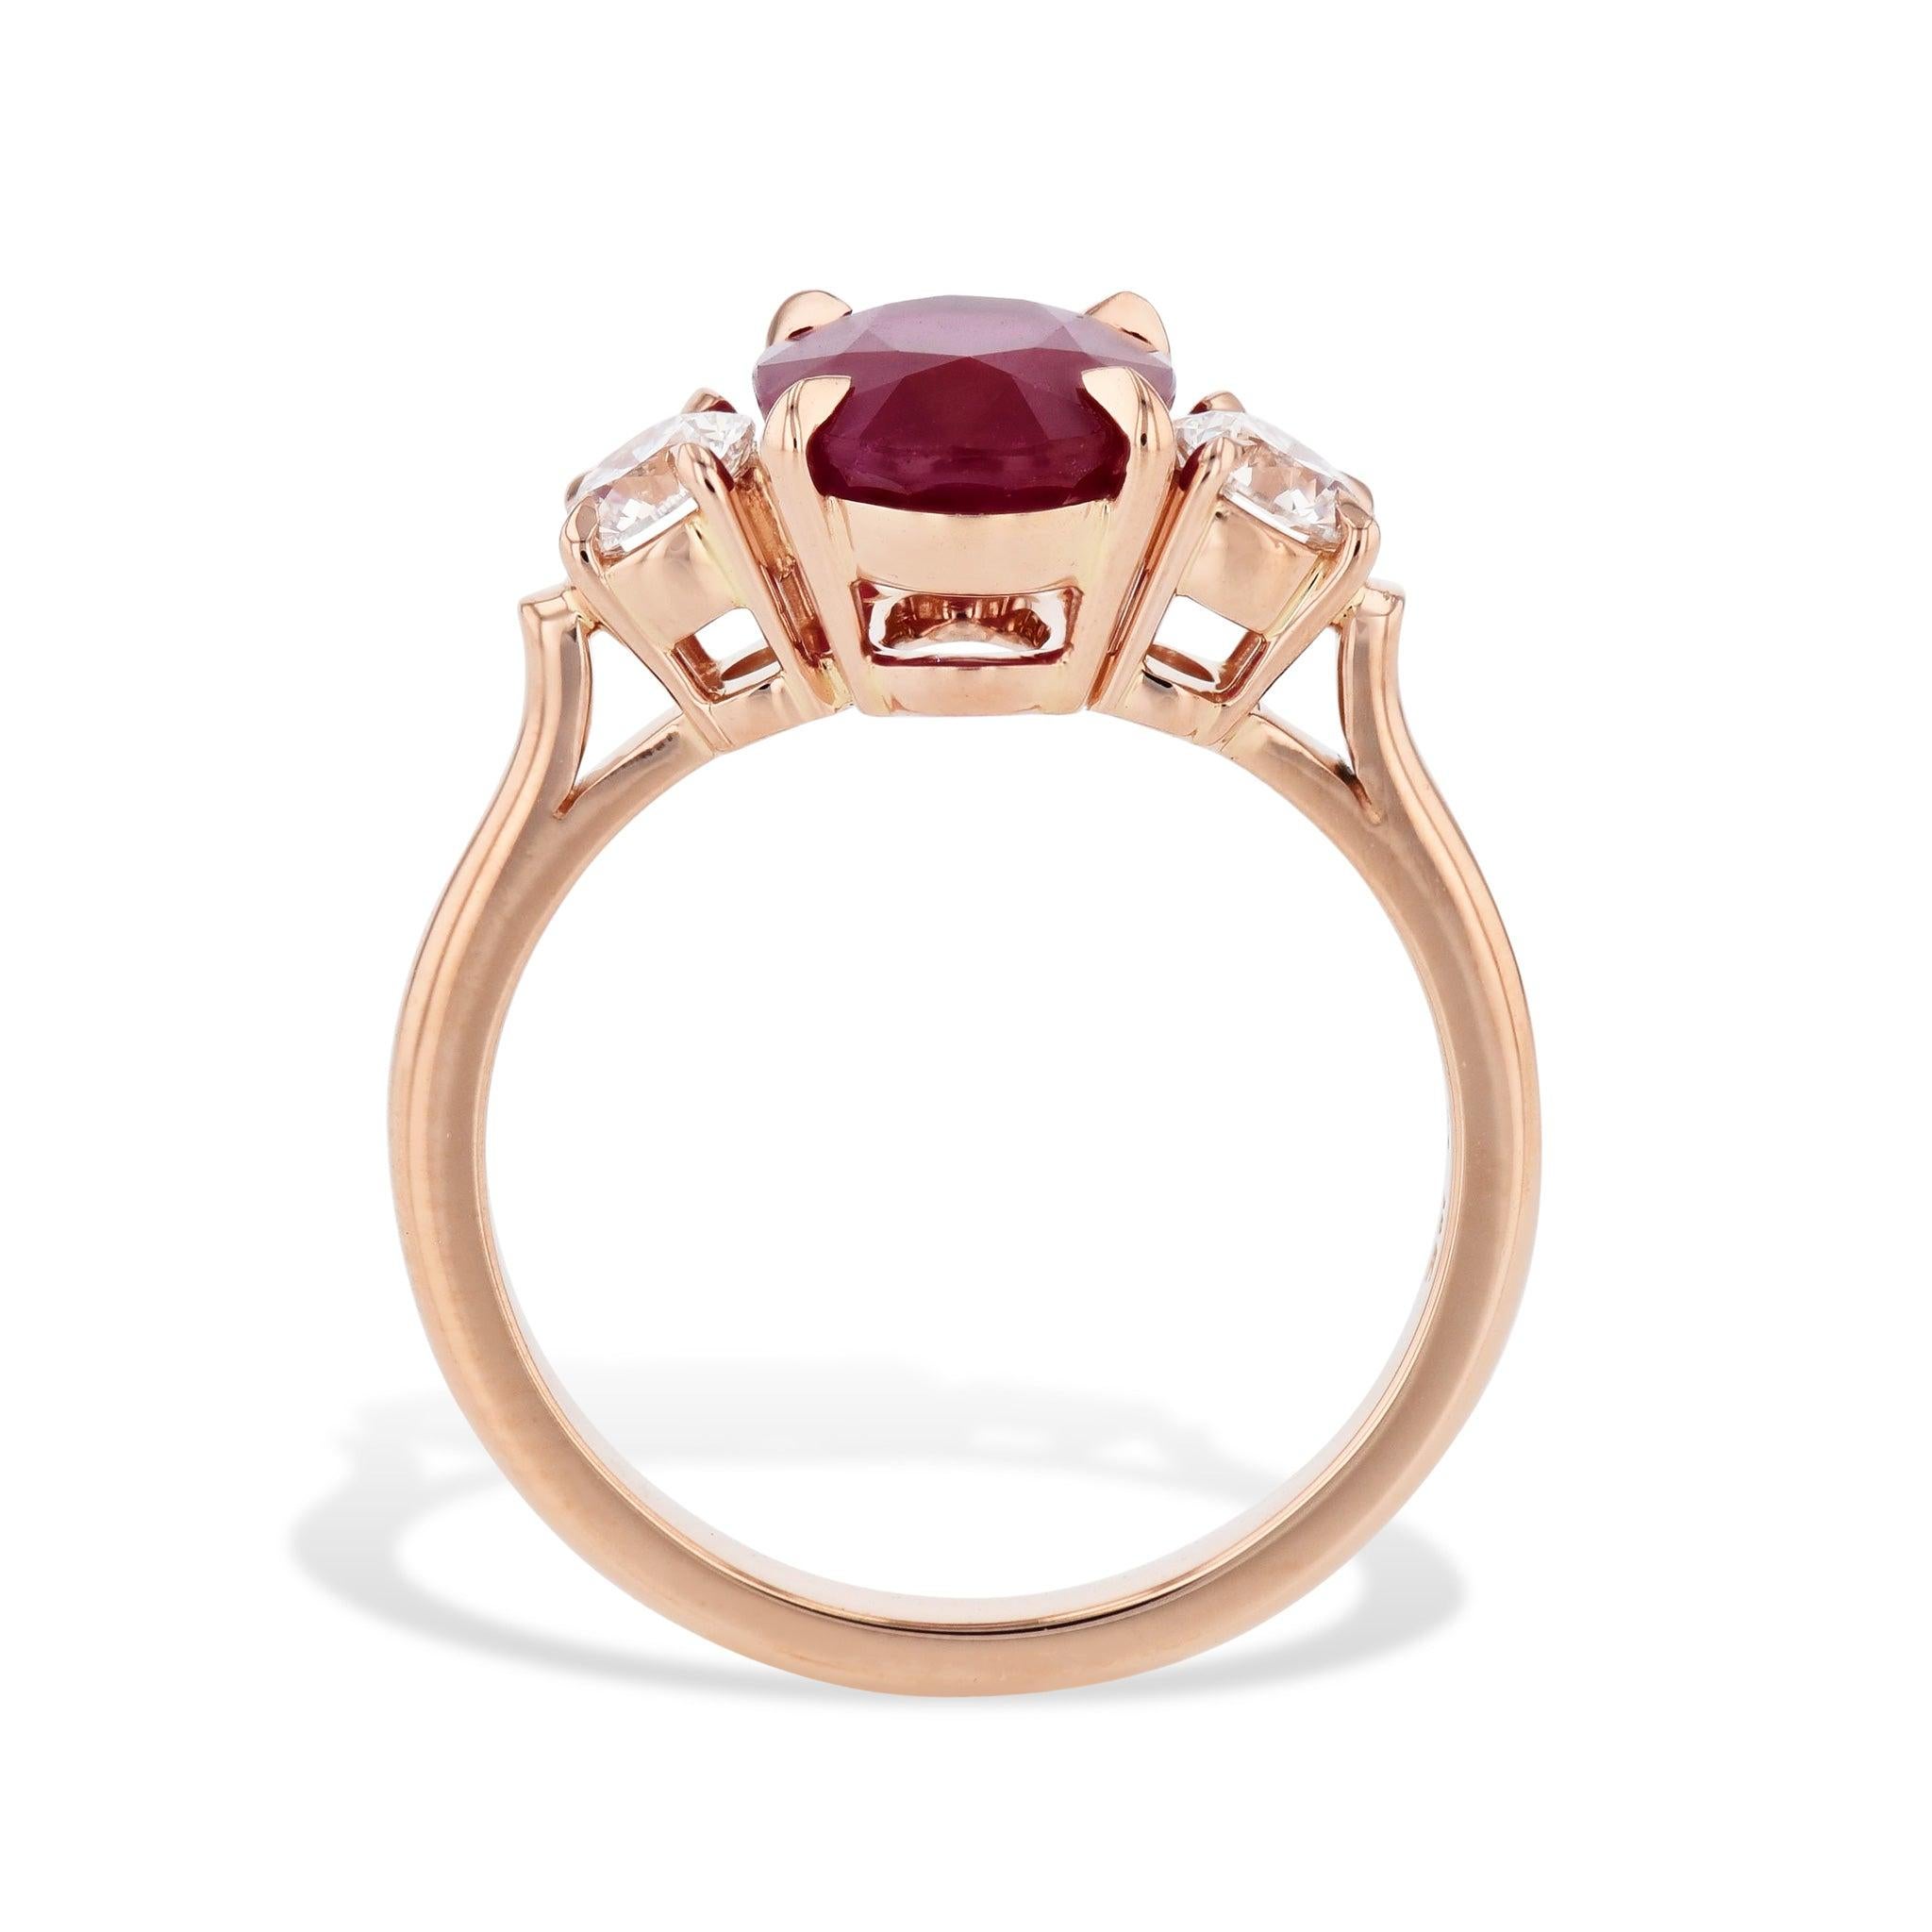 An exquisite heirloom, this handcrafted 18kt. rose gold ring features a dazzling 3.05ct Burma ruby with round diamonds on each side. The perfect symbol of commitment, it's certified by GIA and part of the H&H Collection. Size 6.75.
Burma Ruby and